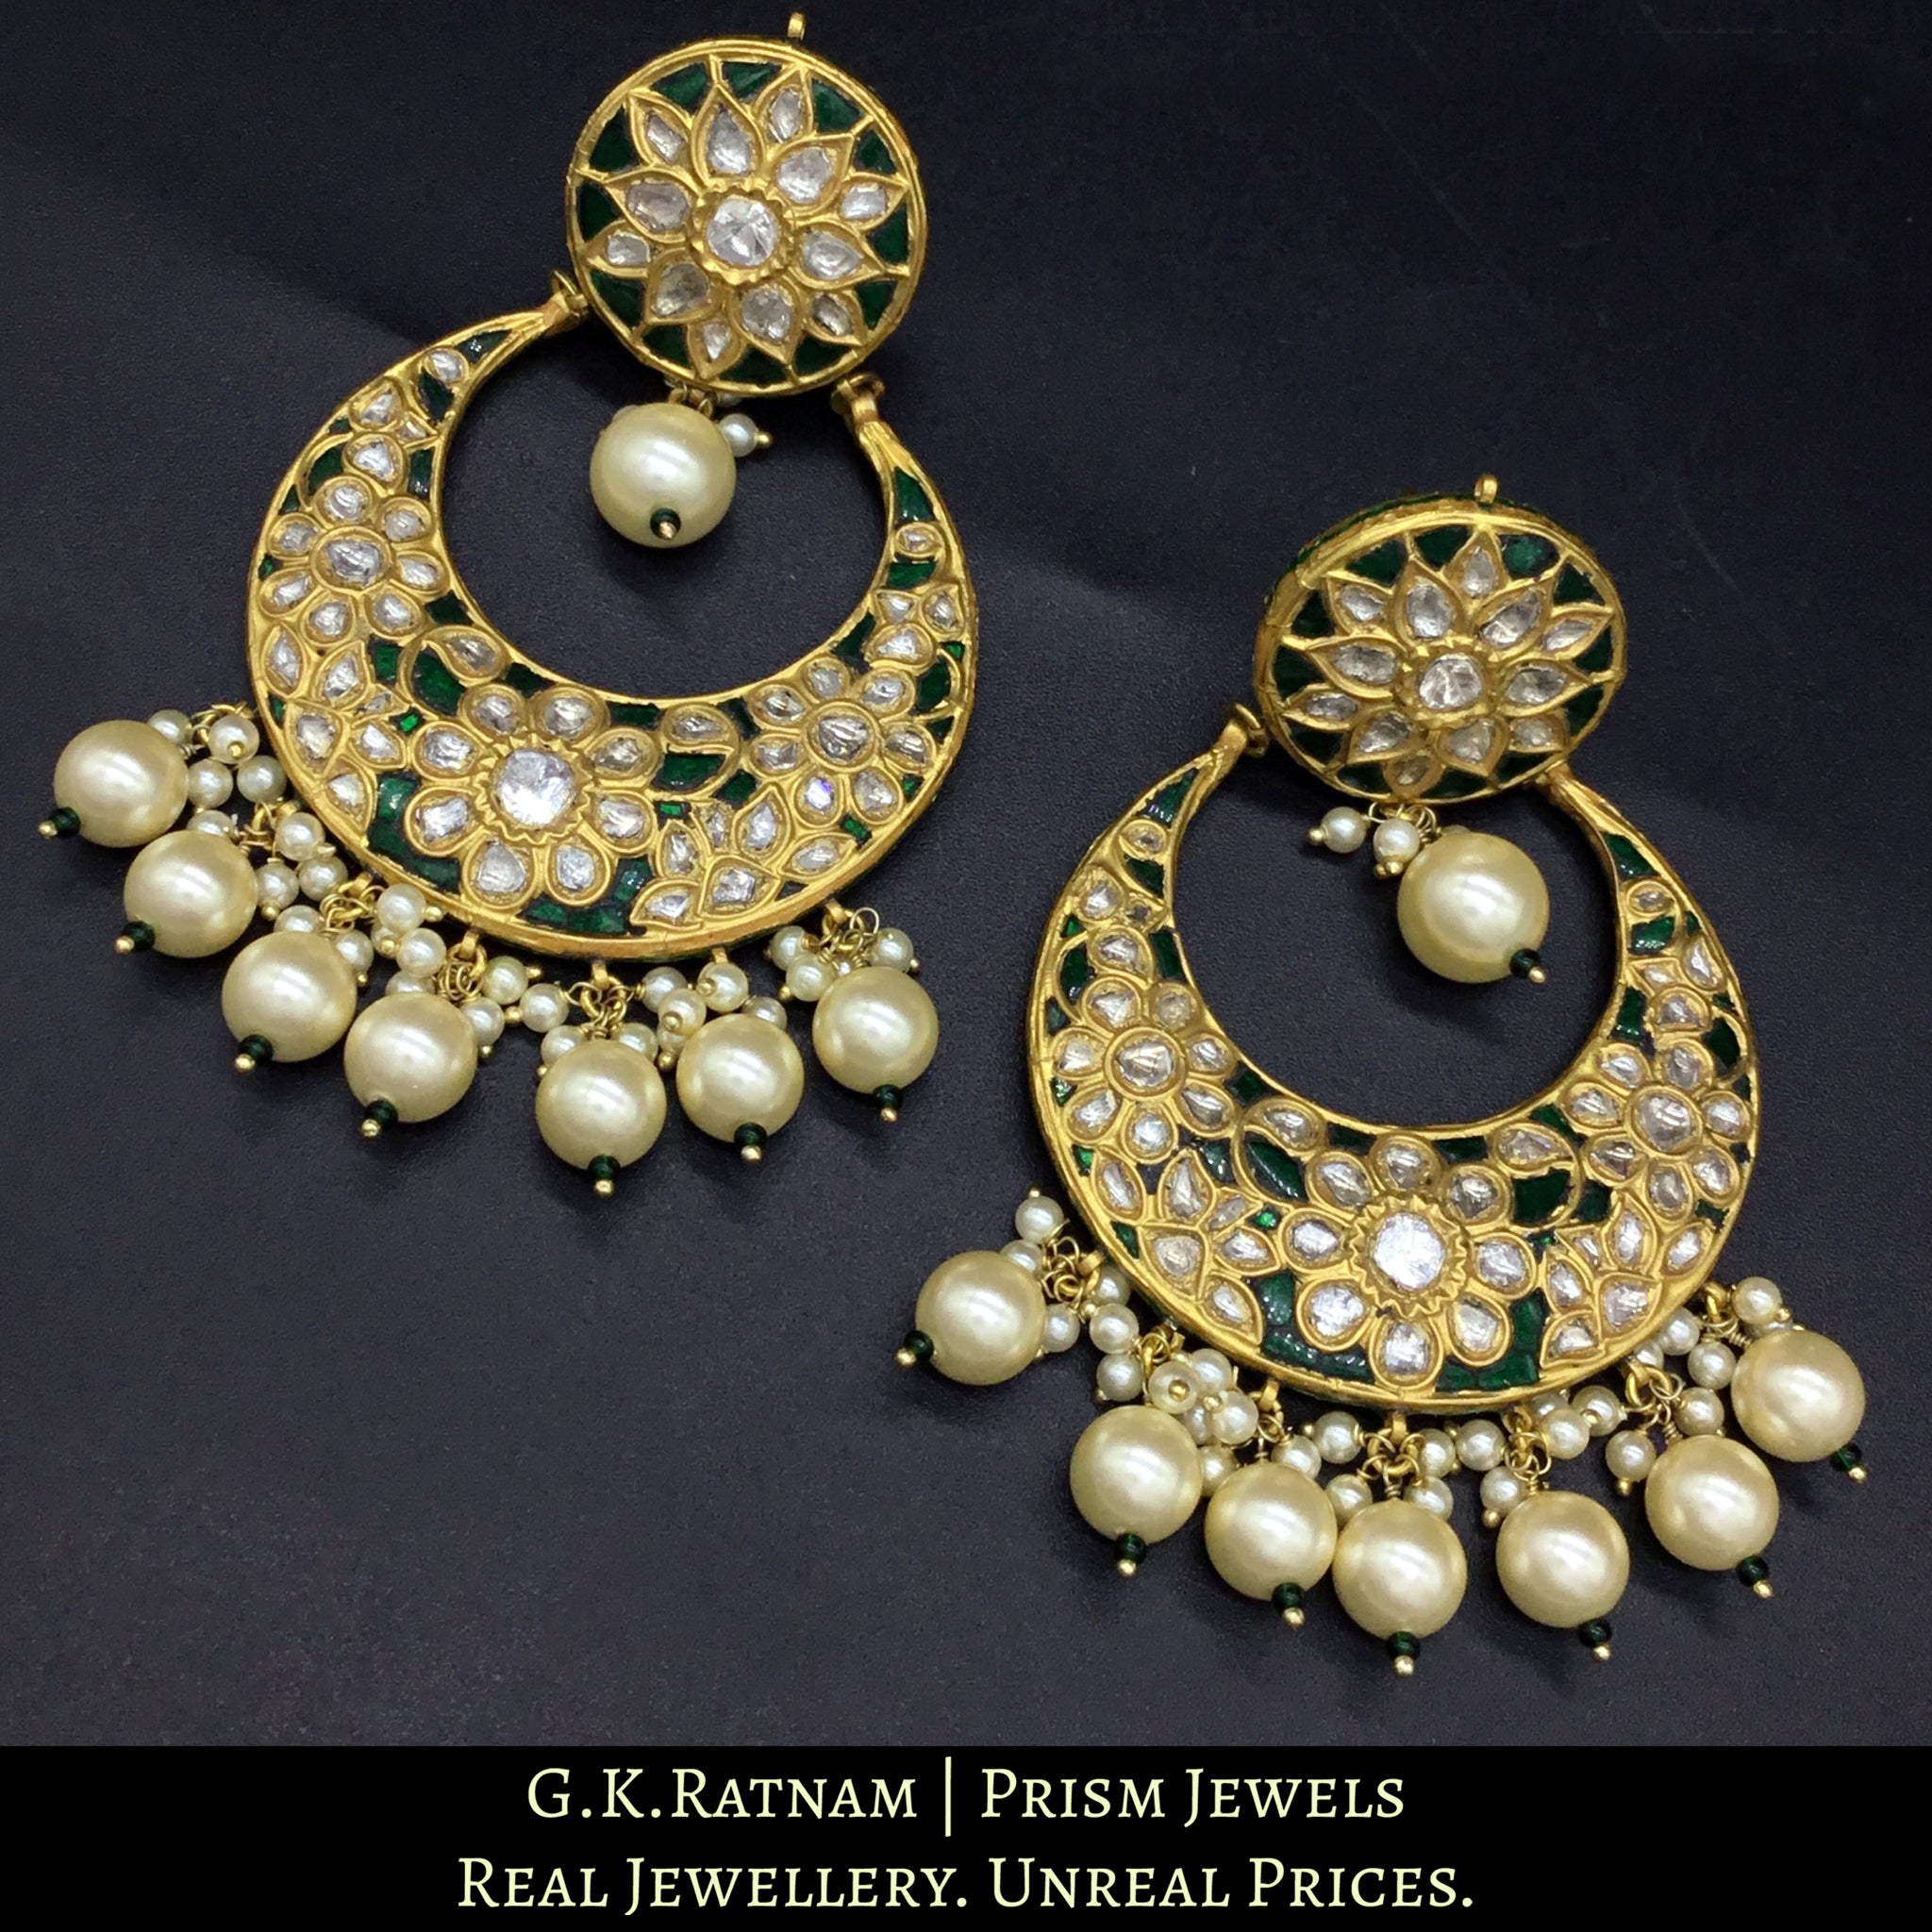 23k Gold and Diamond Polki Chand Bali Earring pair with emerald-green stones and shell pearls